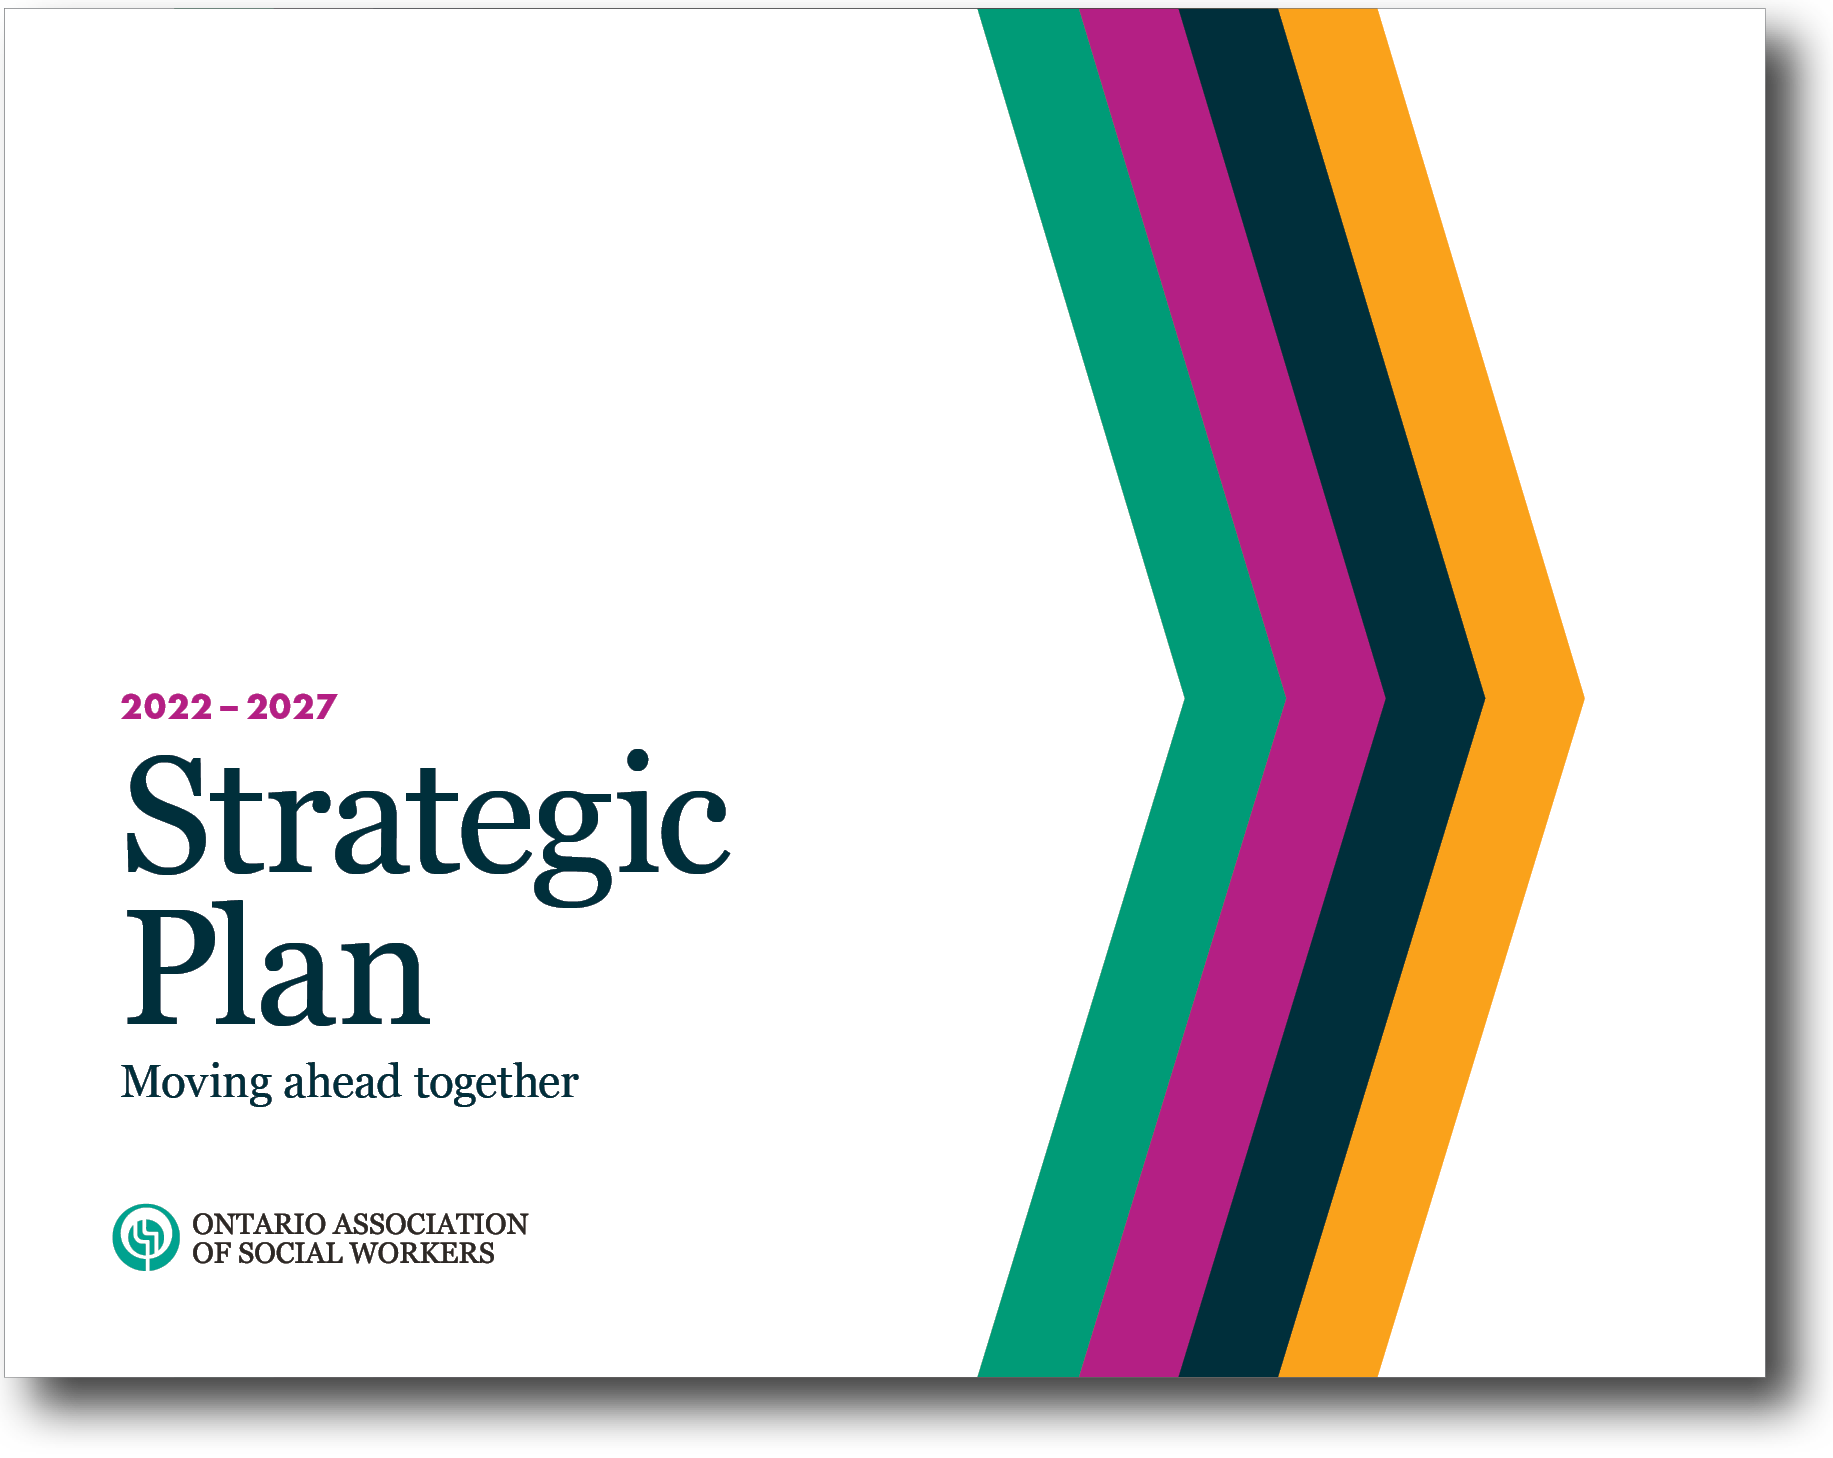 Cover page of detailed version of OASW's 2022-2027 Strategic Plan